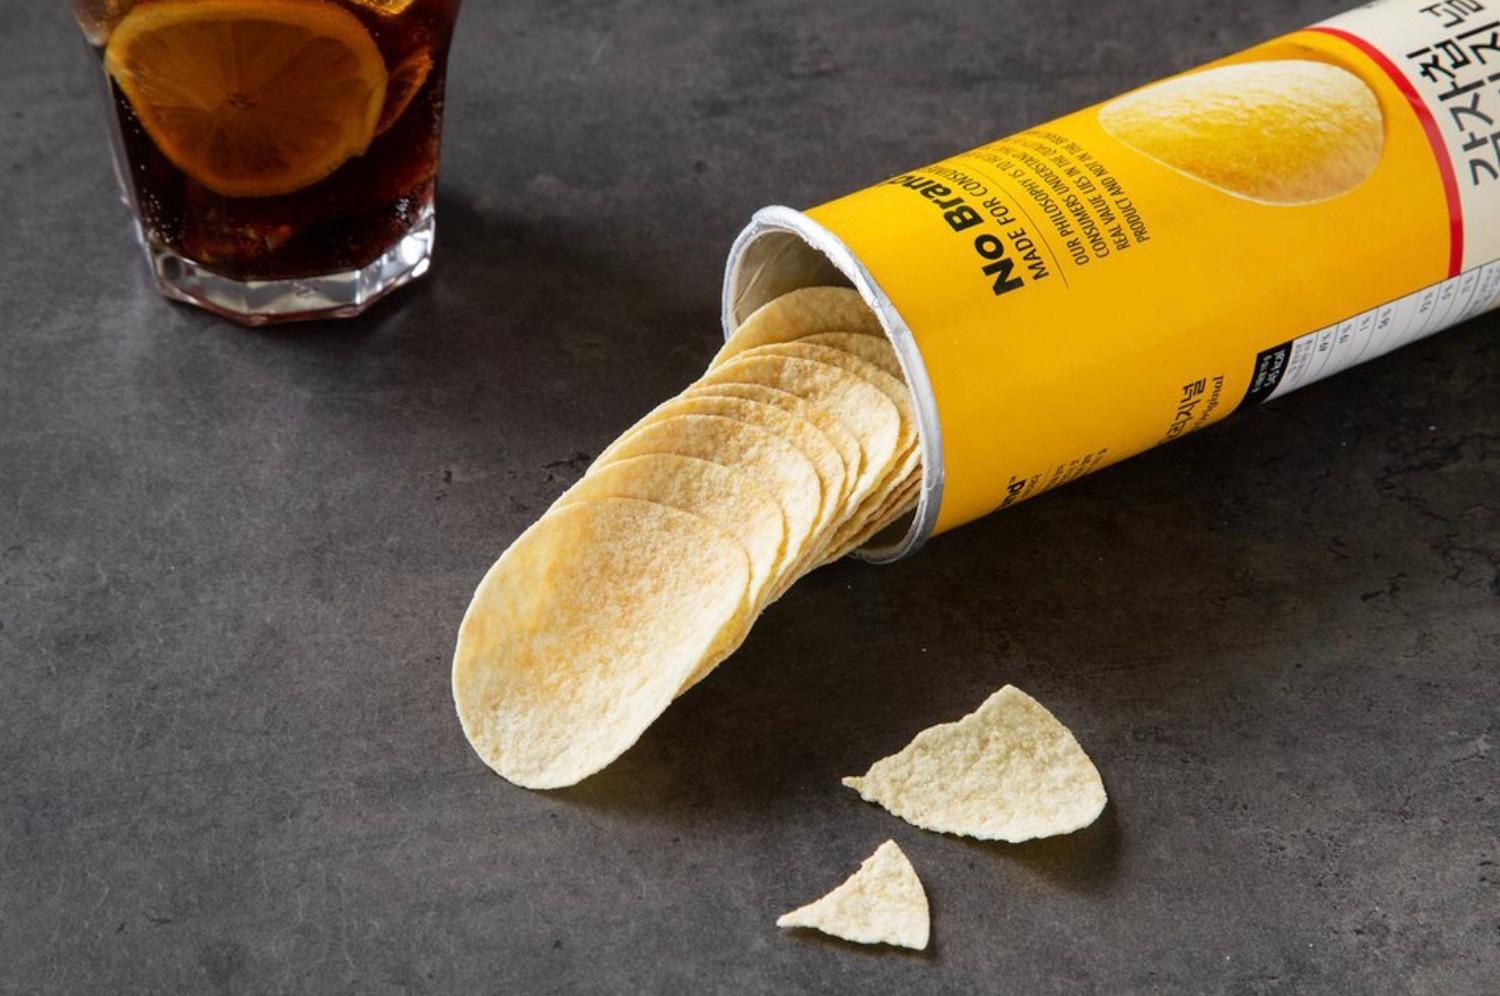 korean brand no brand potato chip original container on its side with chips spilled out